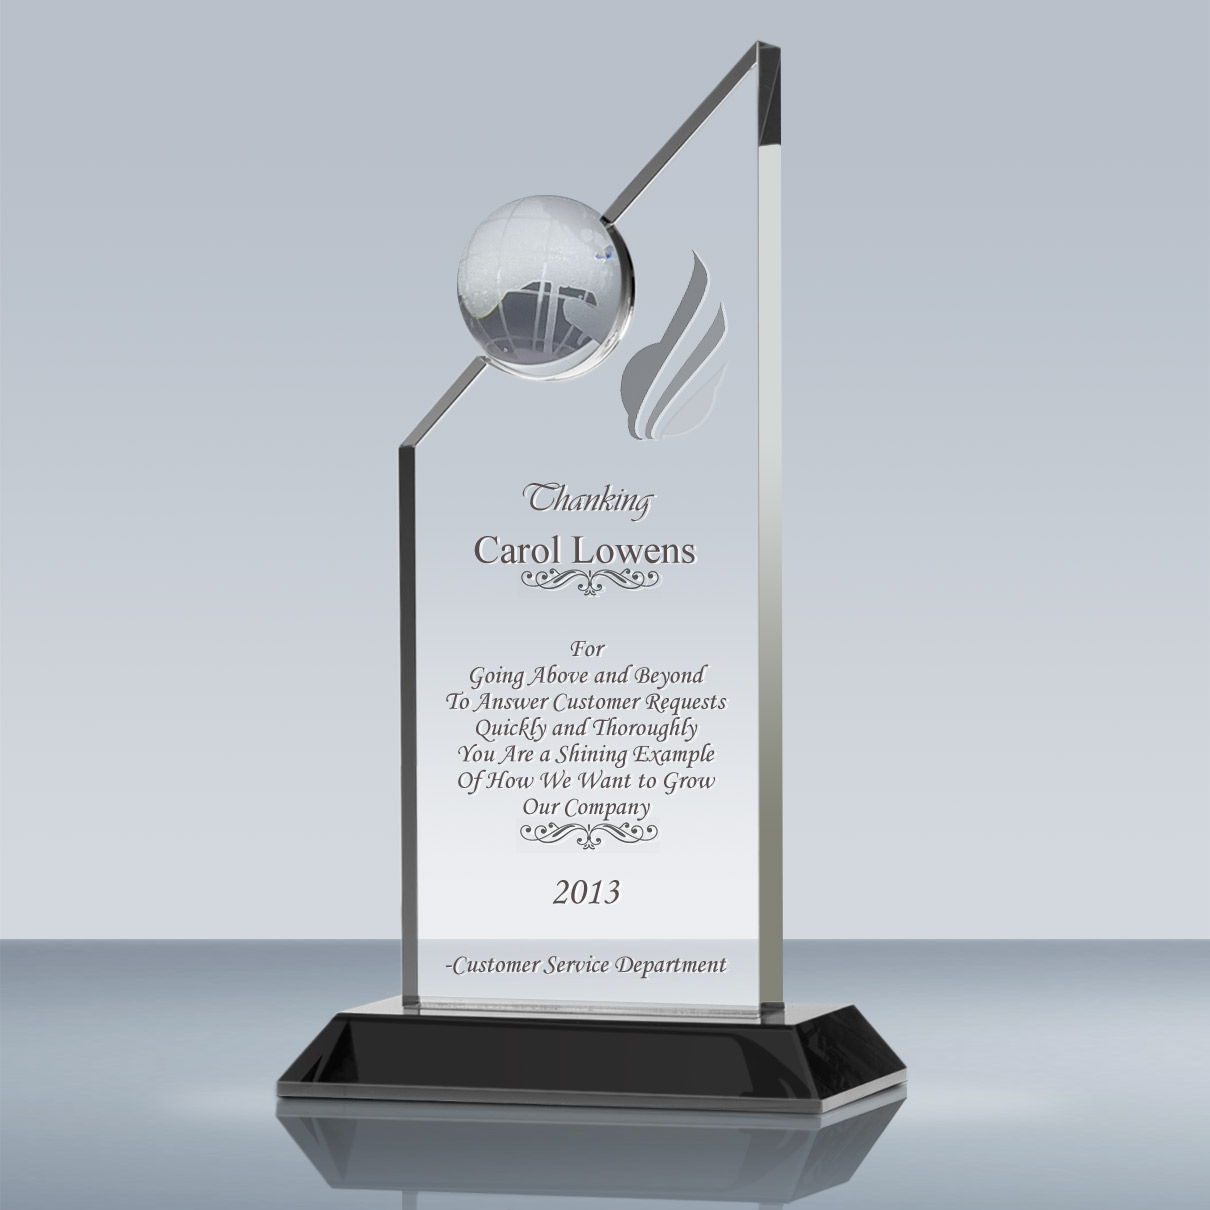 Engraving Included Prime 6 H Custom Engraved Employee Award Employee of The Year Apex Crystal Award